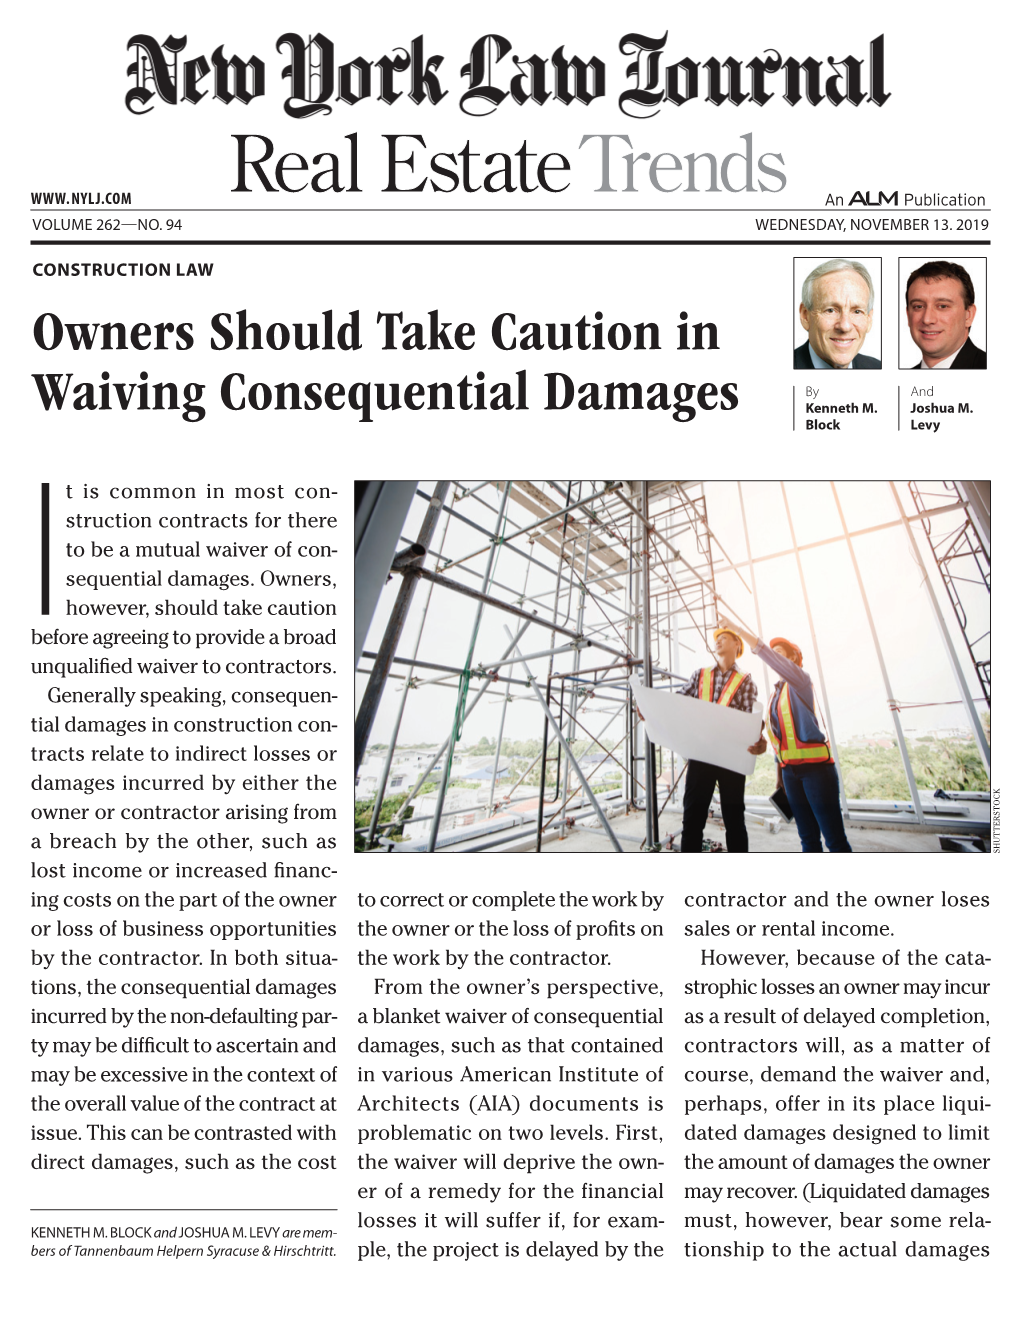 Owners Should Take Caution in Waiving Consequential Damages By